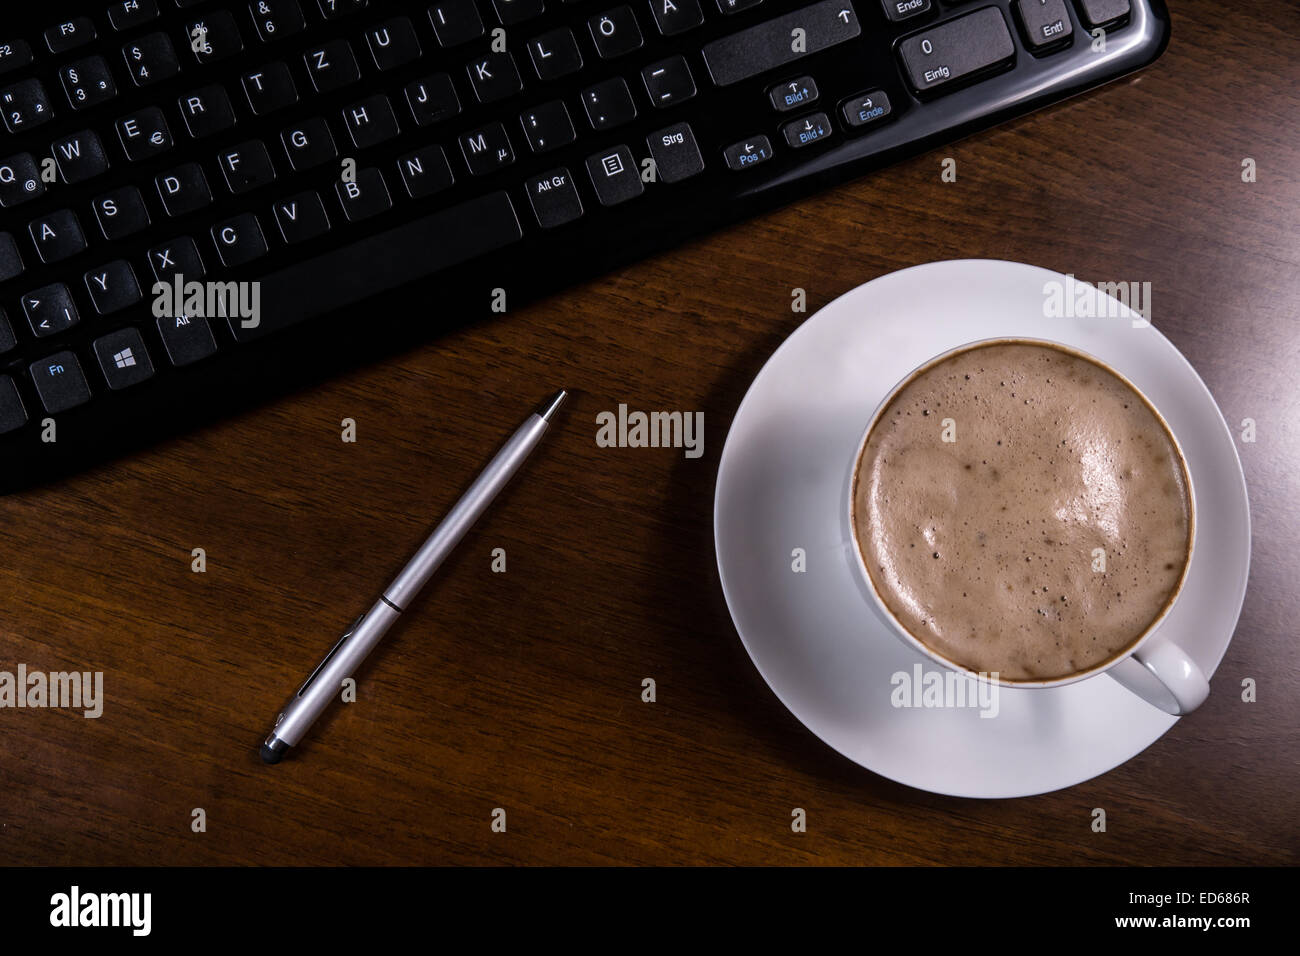 cup coffee, keyboard and pen on desk Stock Photo